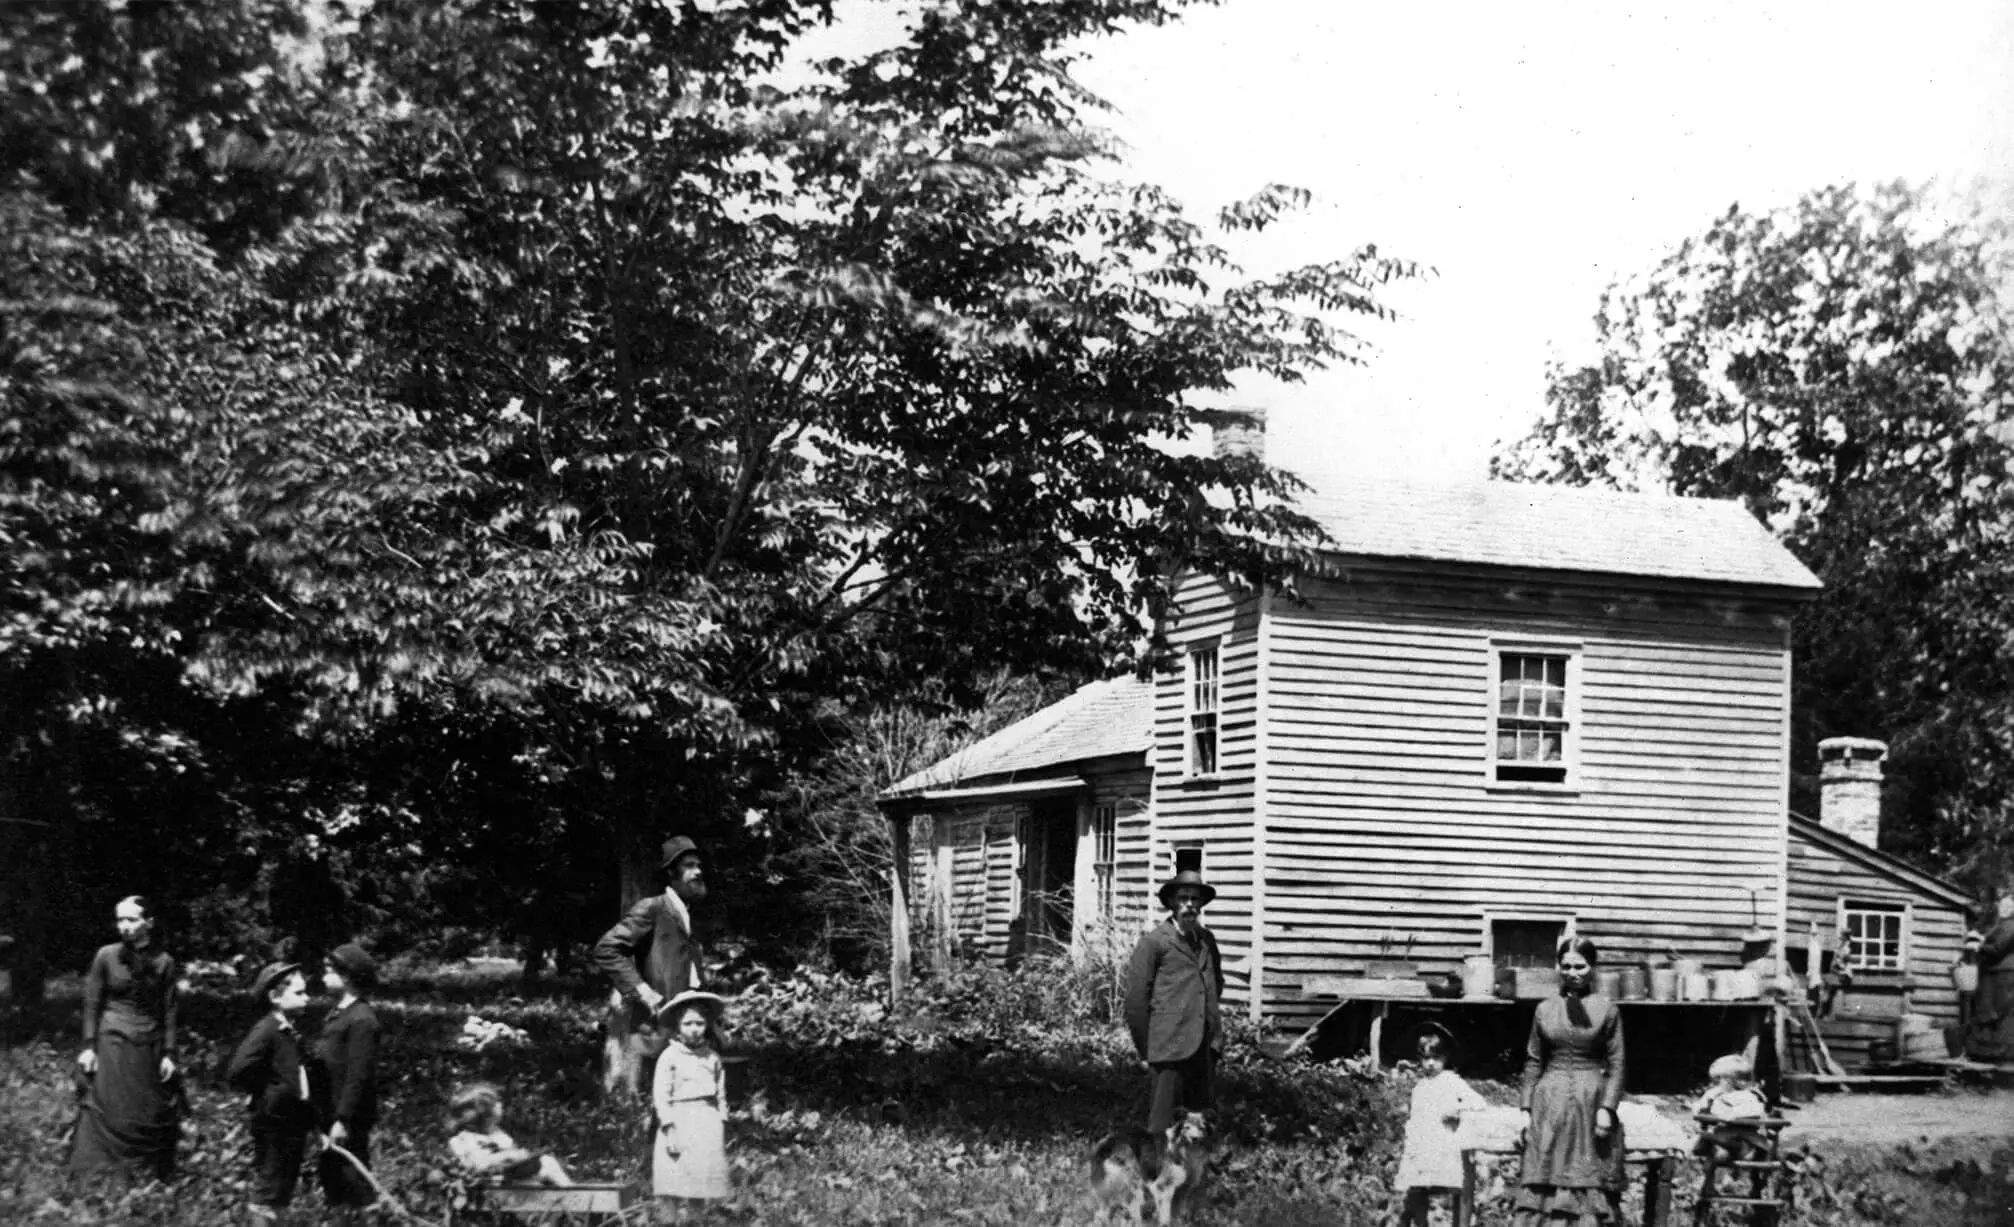 Photo of a light-colored two-story house. There are many trees surrounding the house. Several children, men and women, stand in front